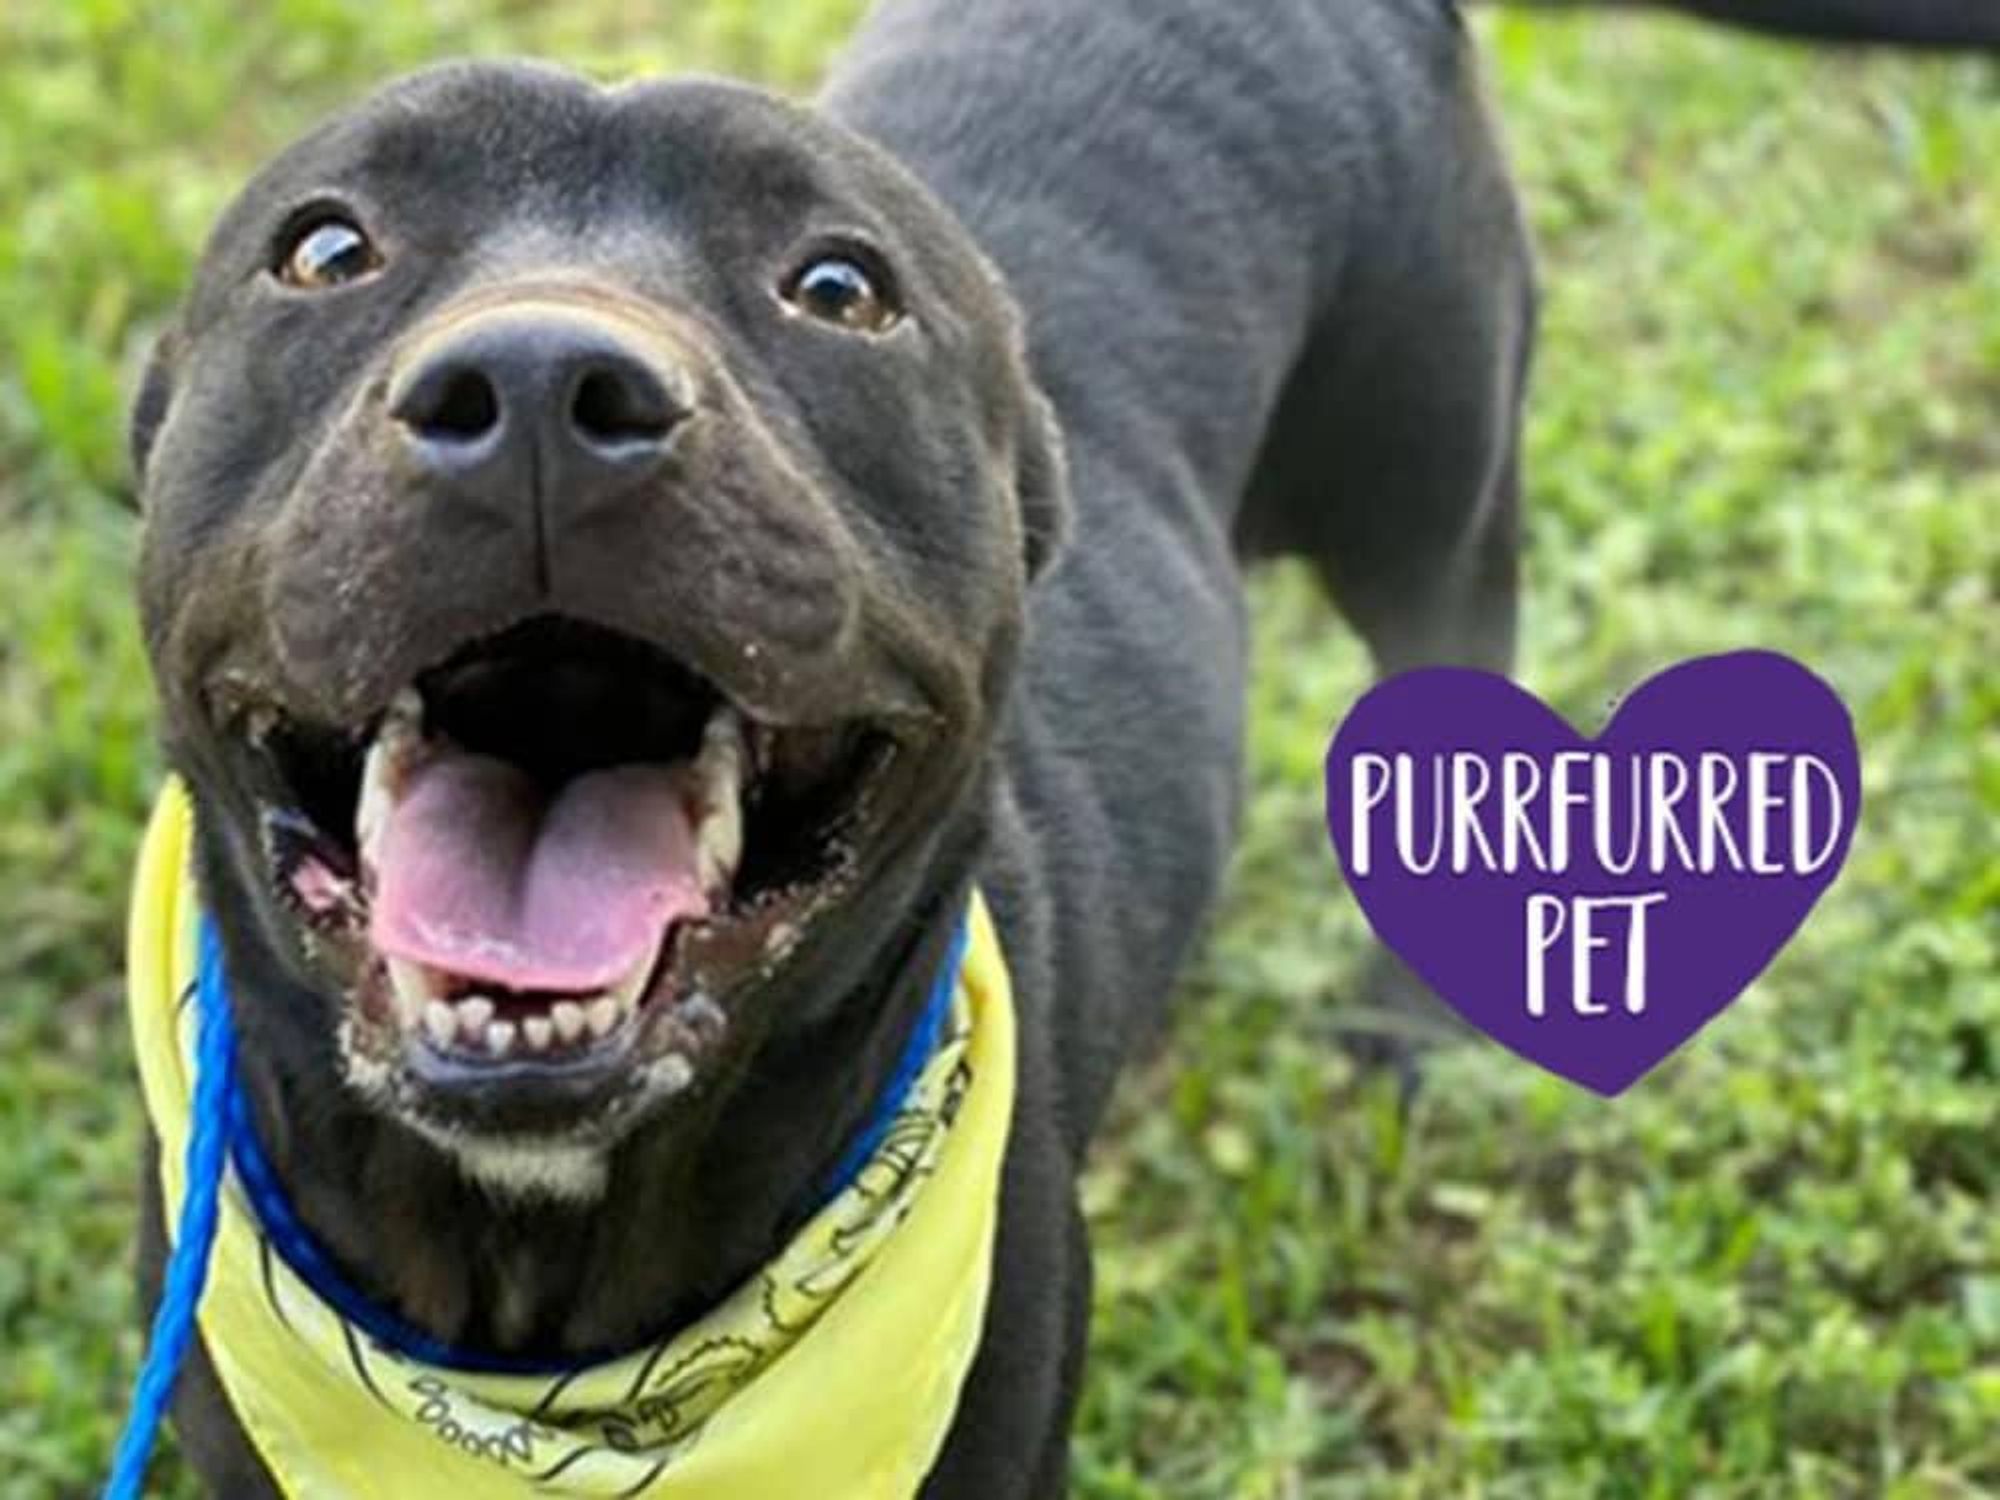 Houston city animal shelter waives adoption fees for future furry friends -  CultureMap Houston